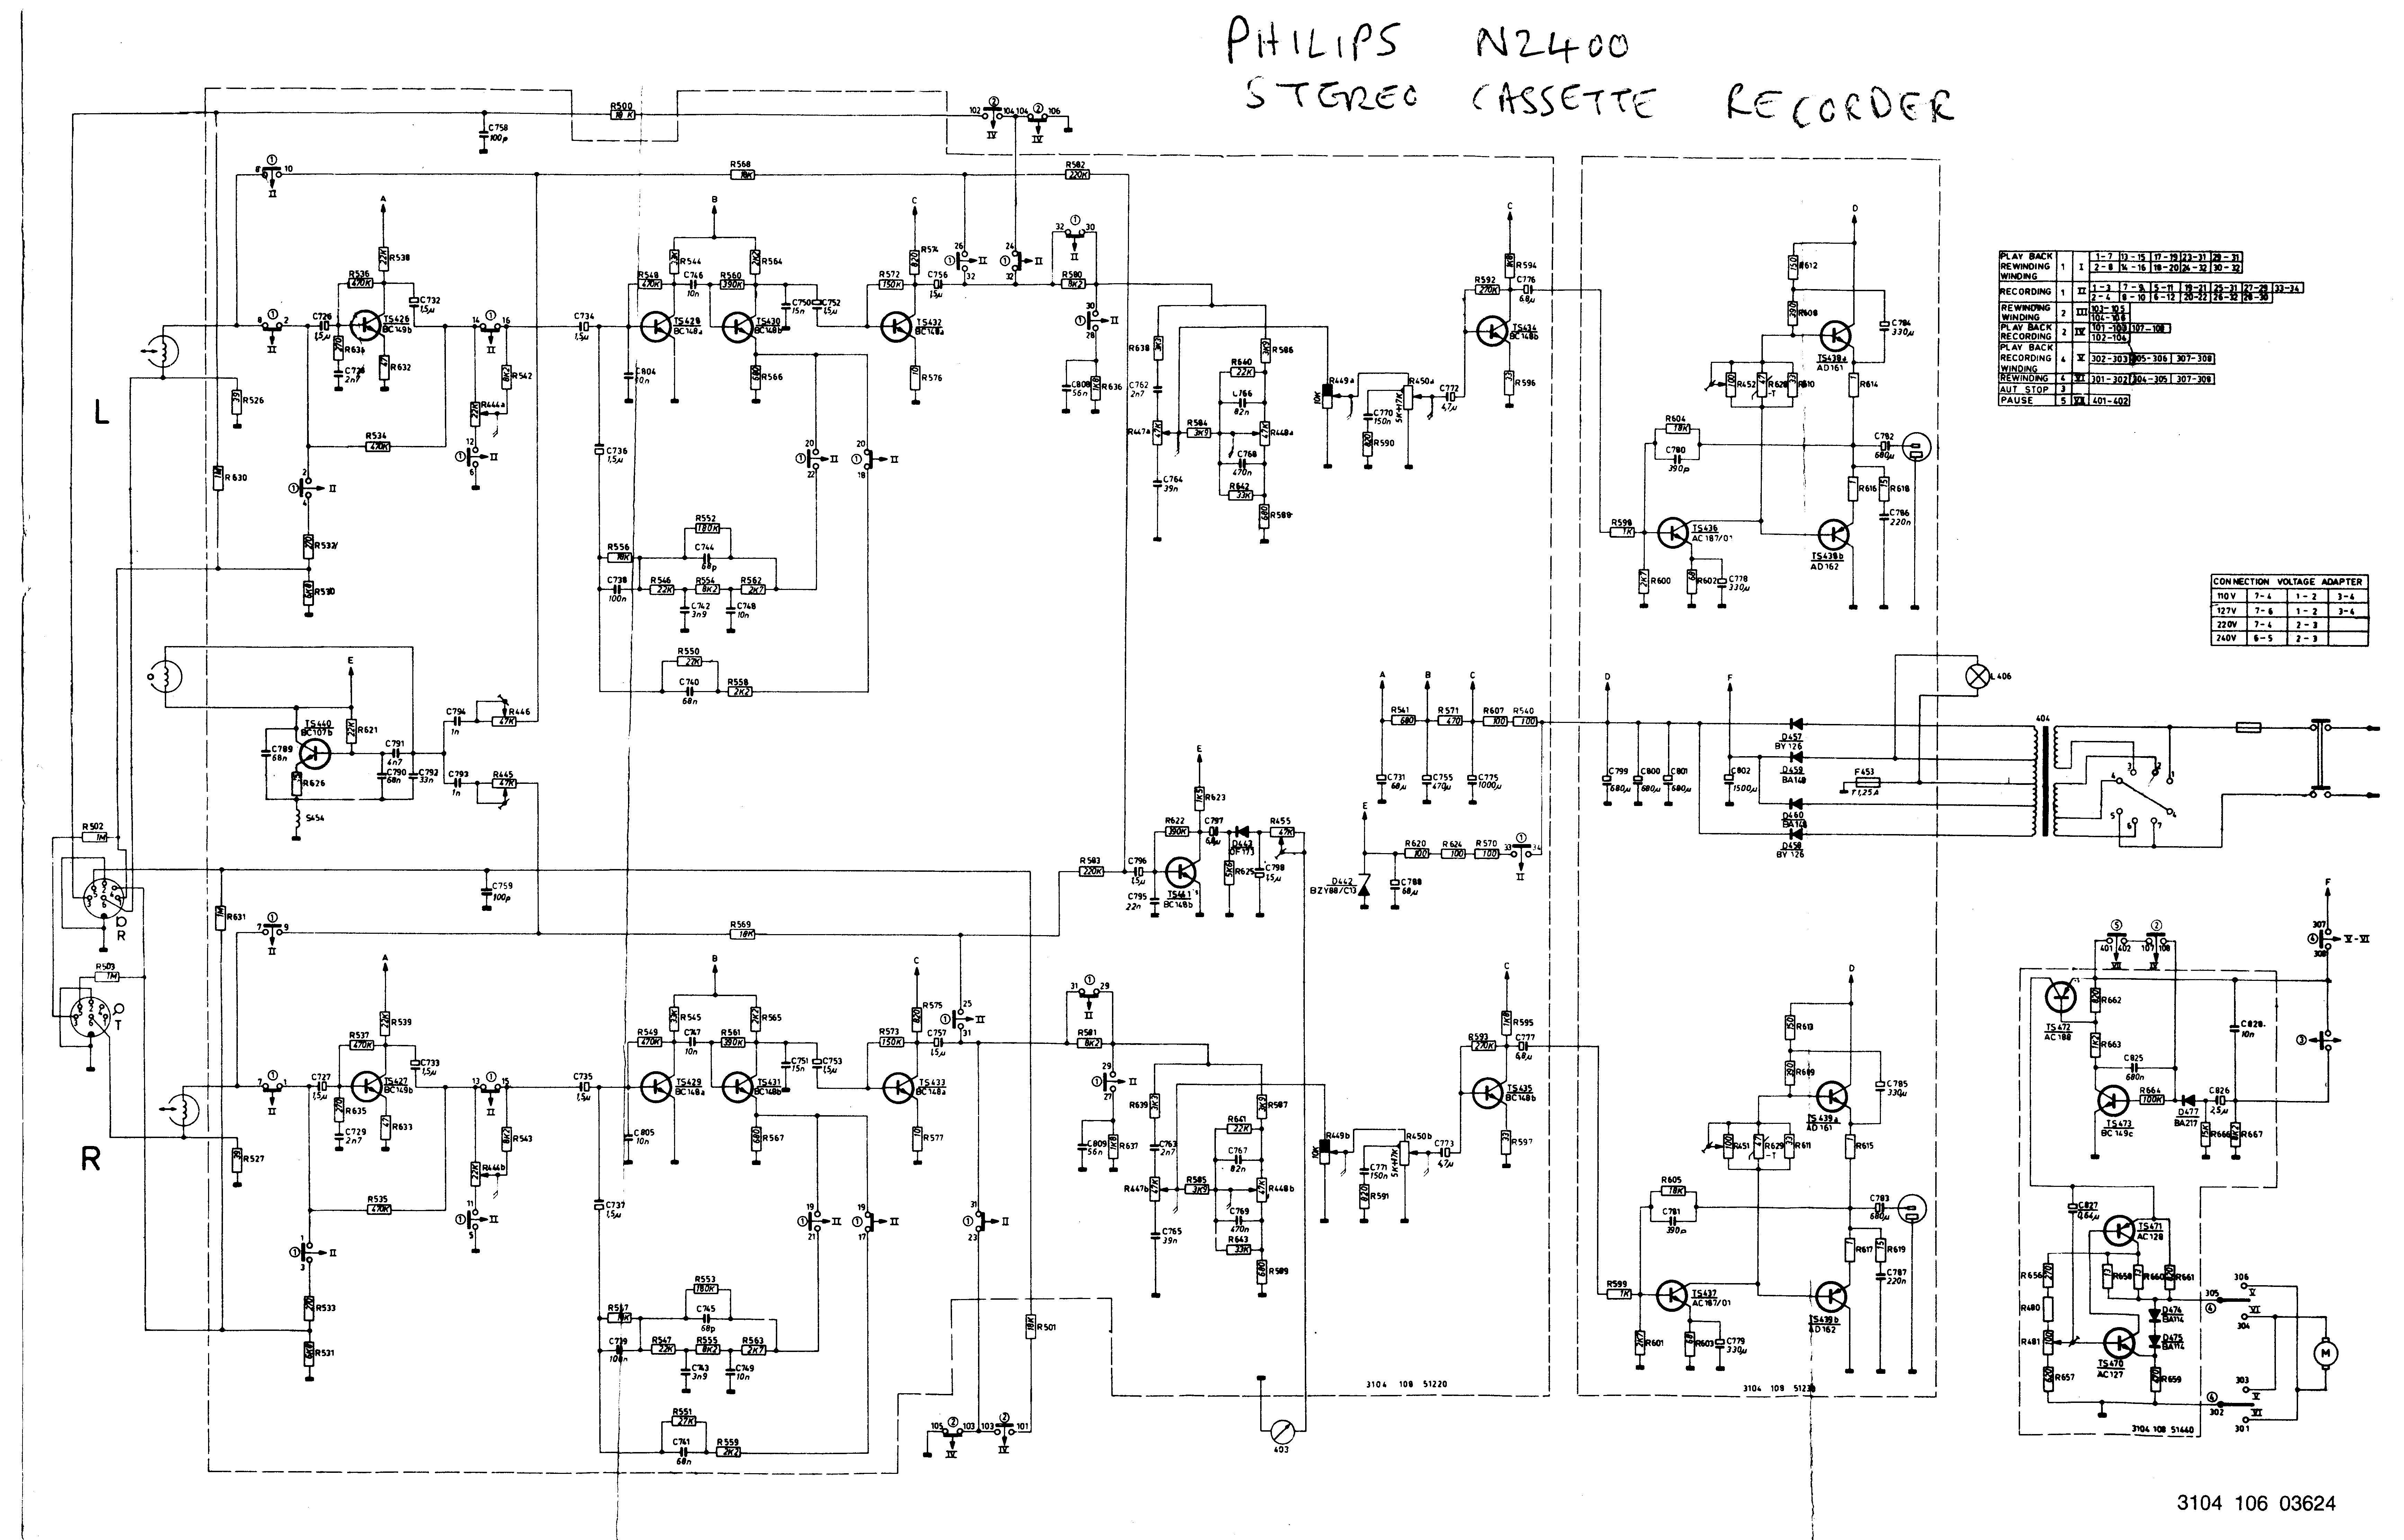   Schematic for Philips N2400 Stereo Cassette Recorder